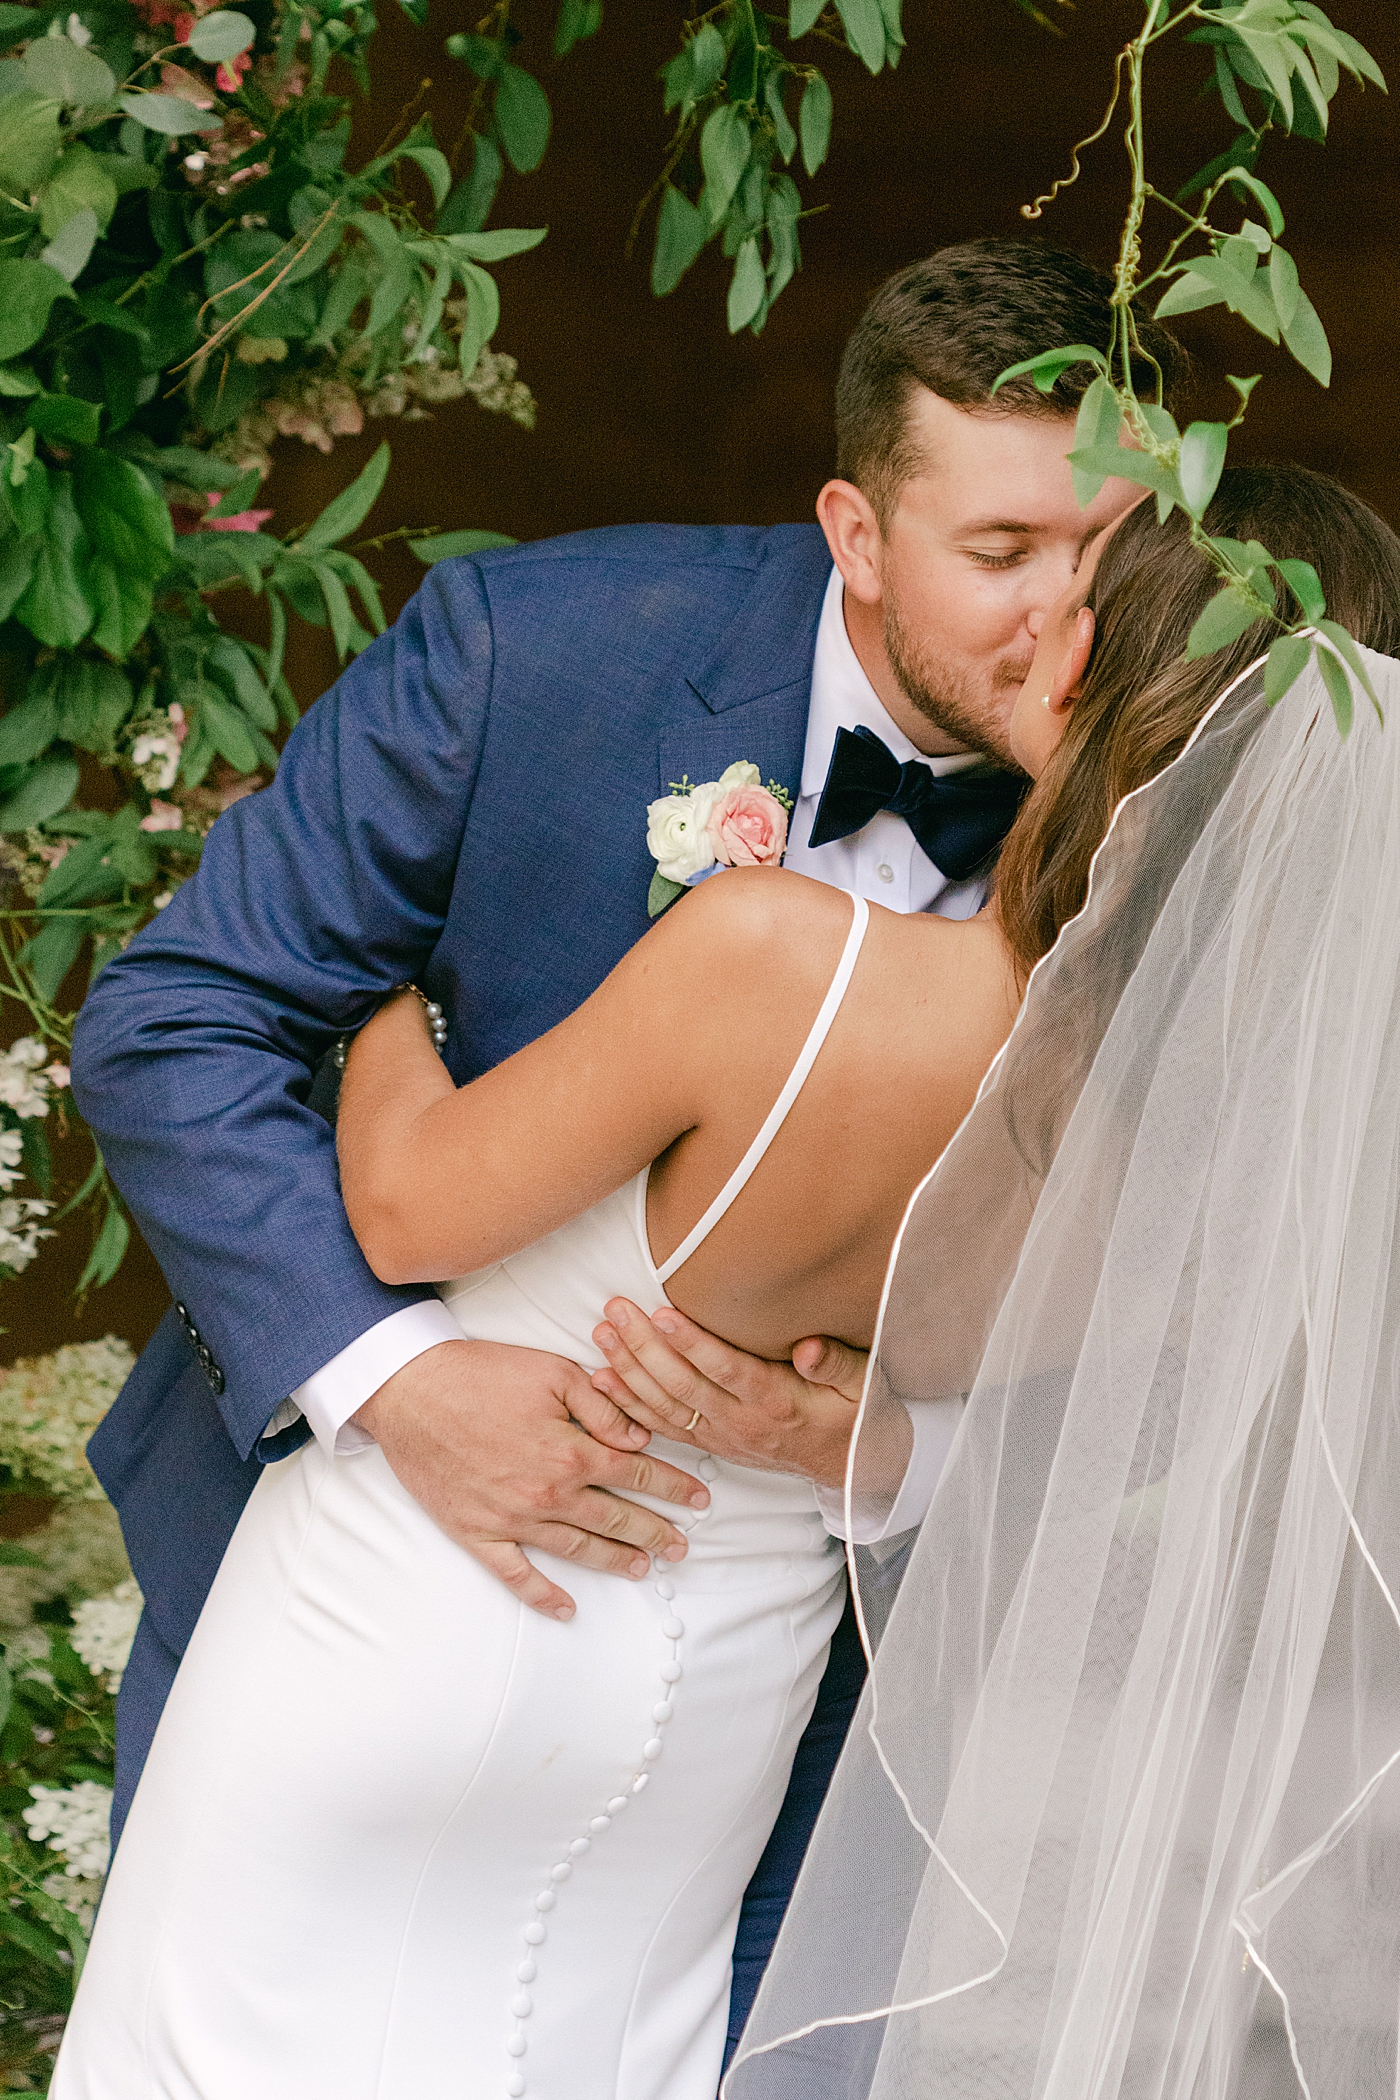 Bride and groom kissing during portraits | Image by Hope Helmuth Photography